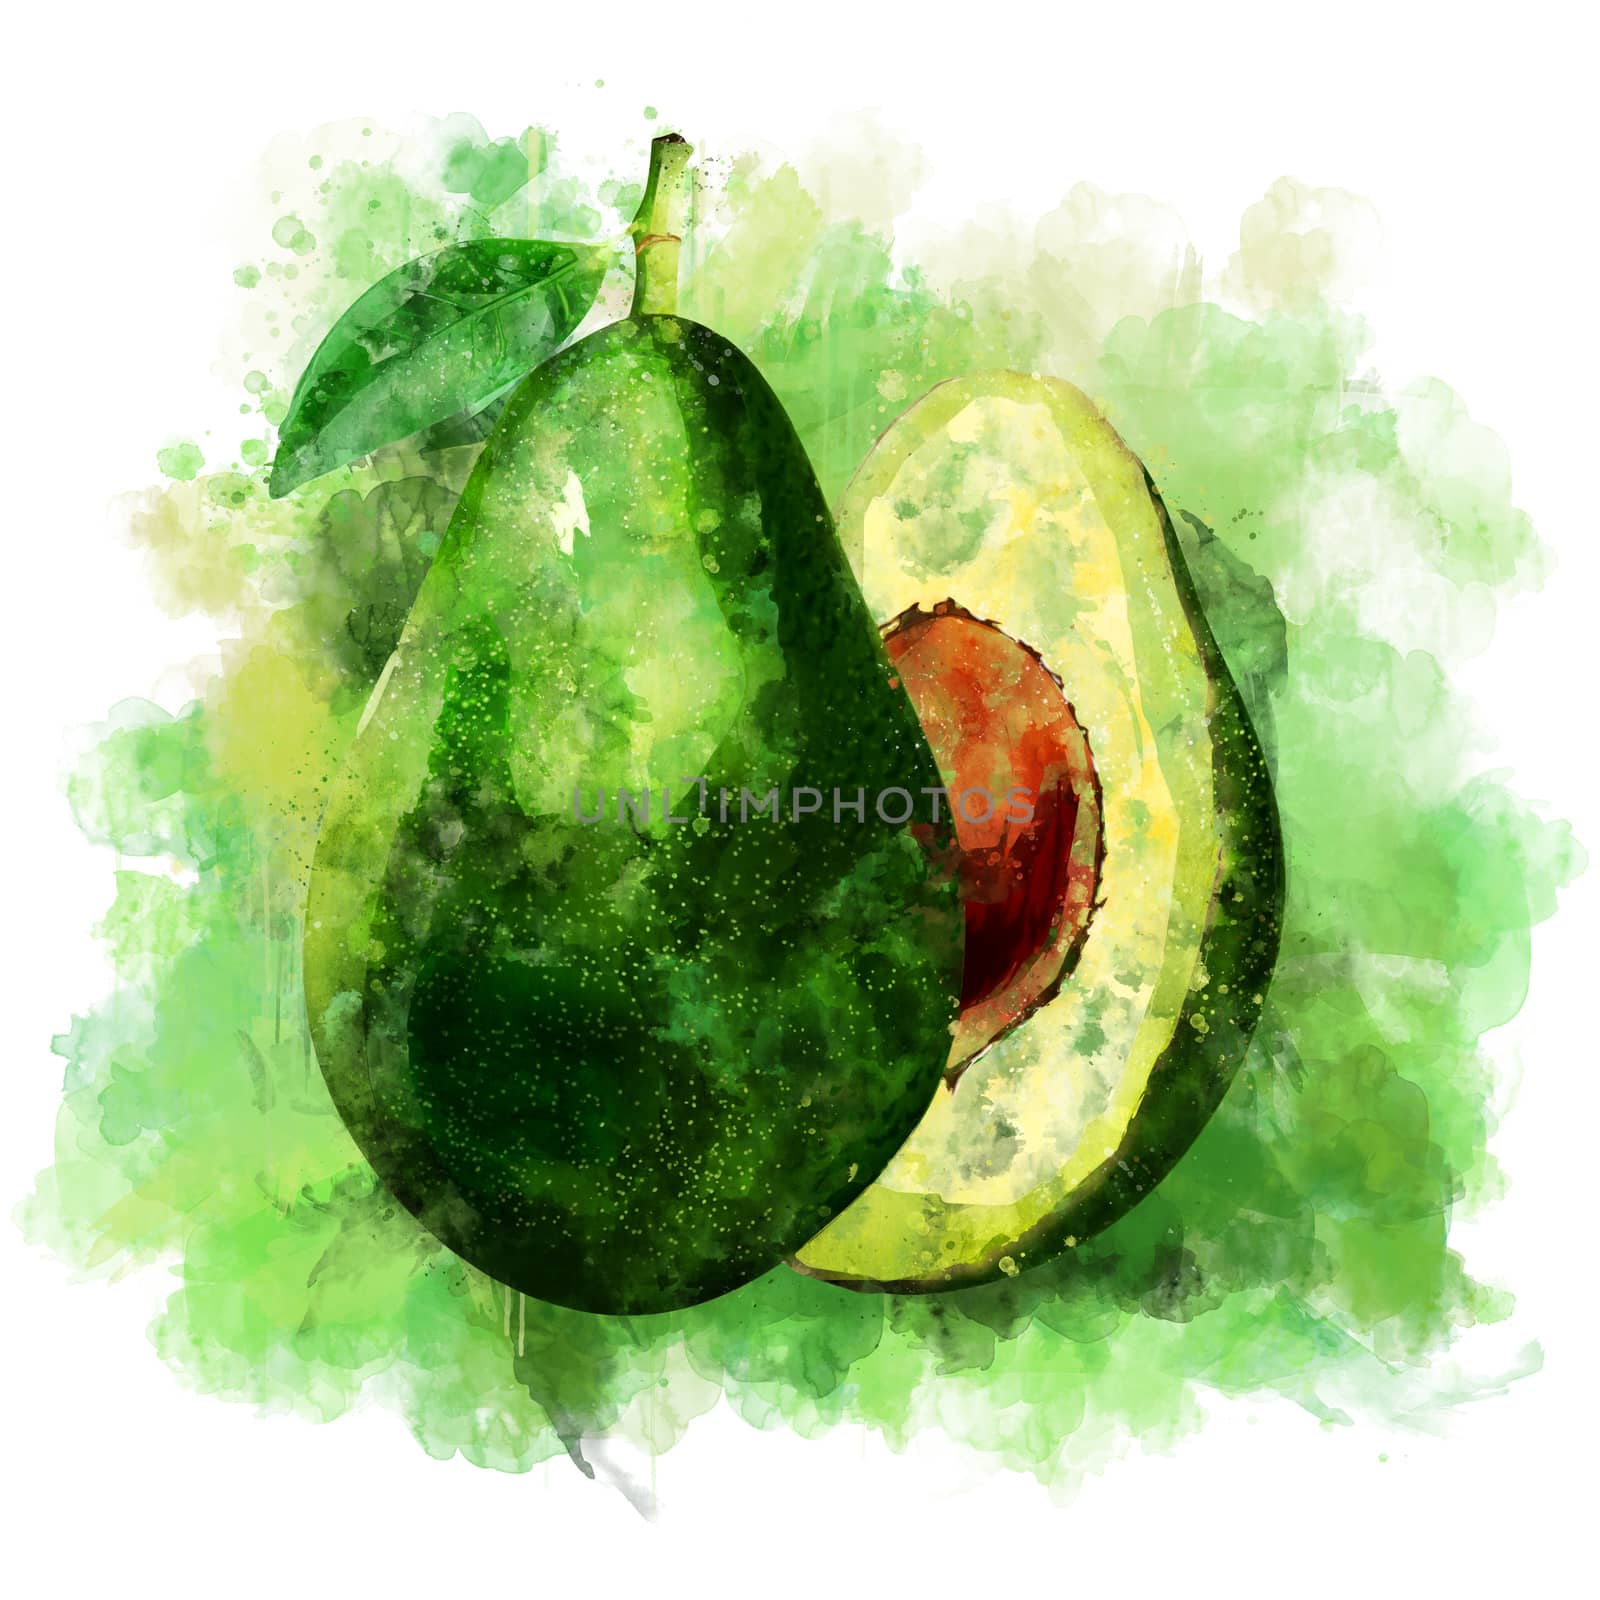 Avocado, isolated hand-painted illustration on a white background